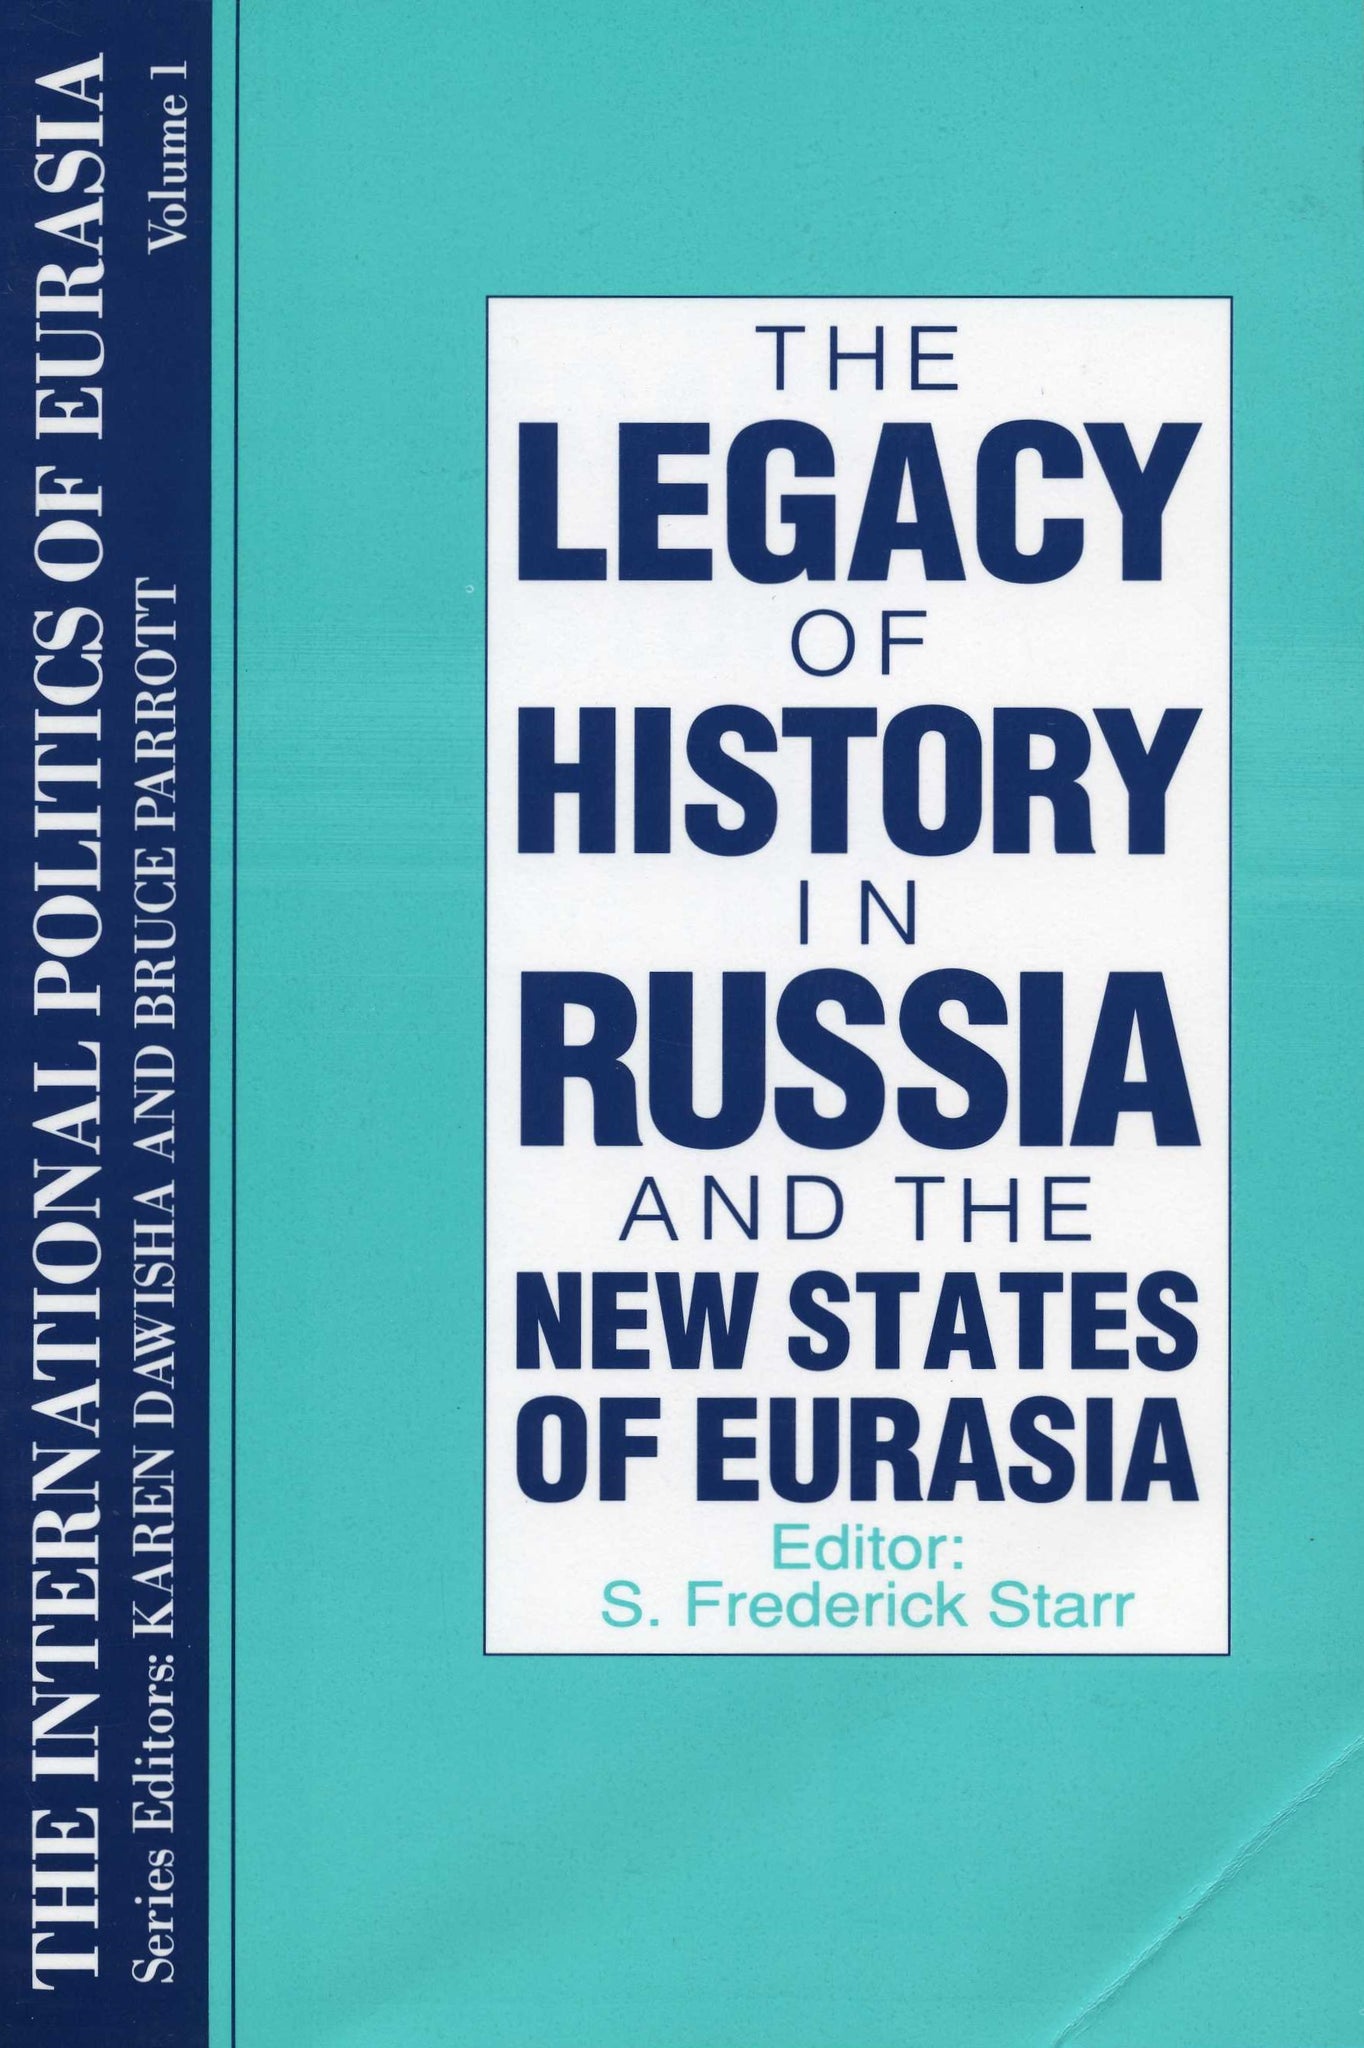 LEGACY OF HISTORY IN RUSSIA AND THE NEW STATES OF EURASIA